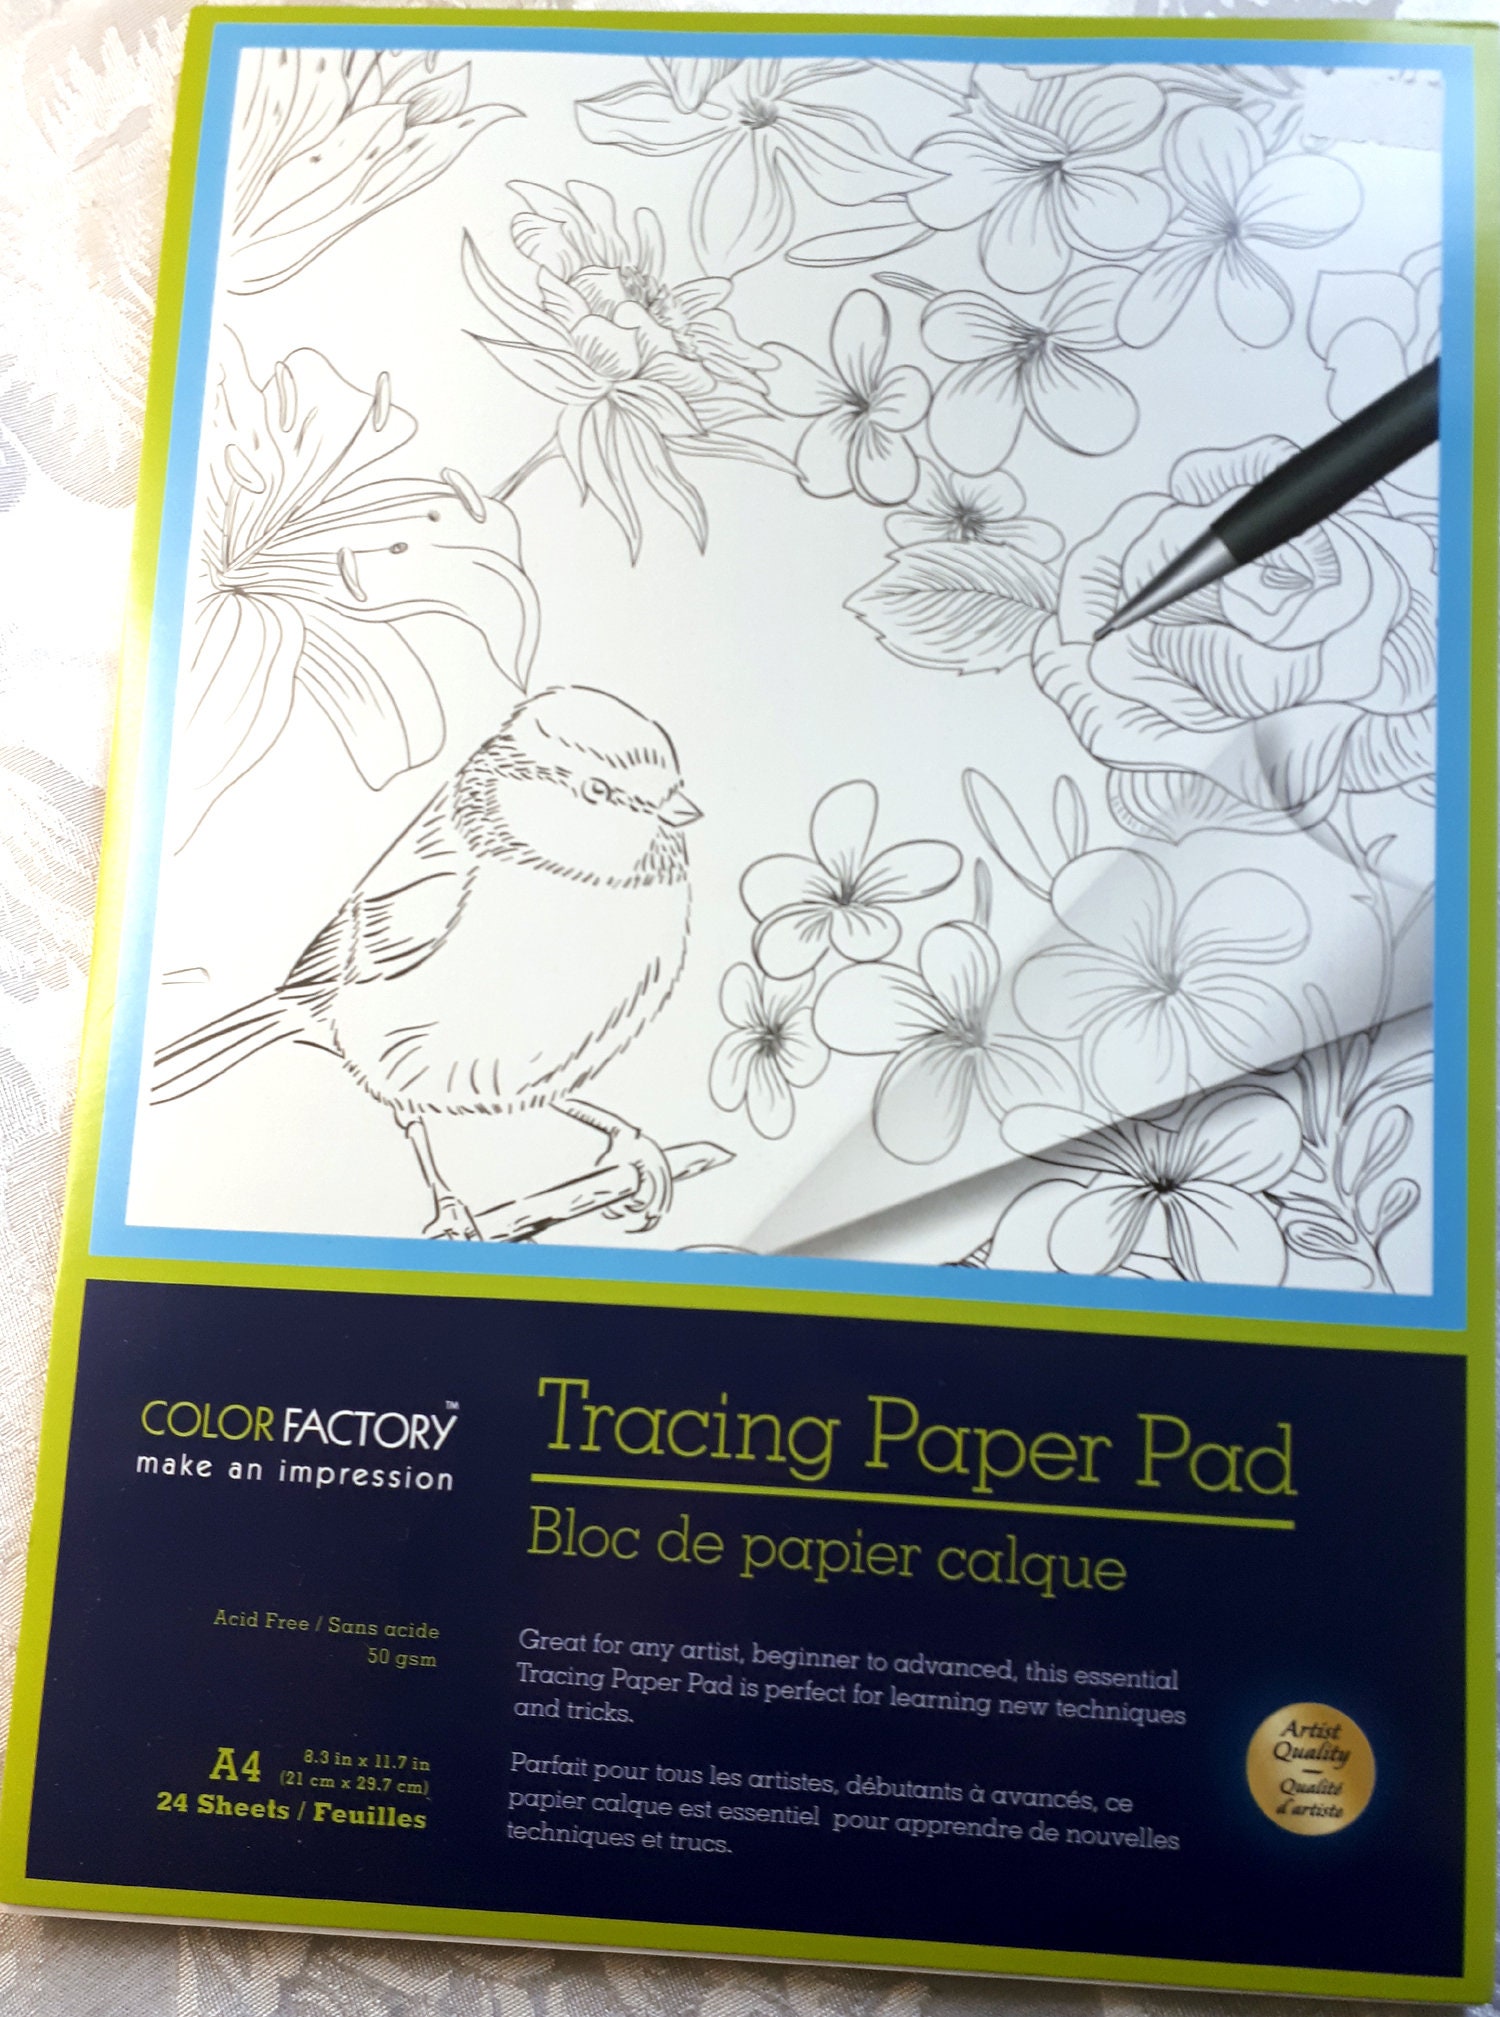 Ashton and Wright - A5 Tracing Pad - 60gsm Paper - 60 Sheets